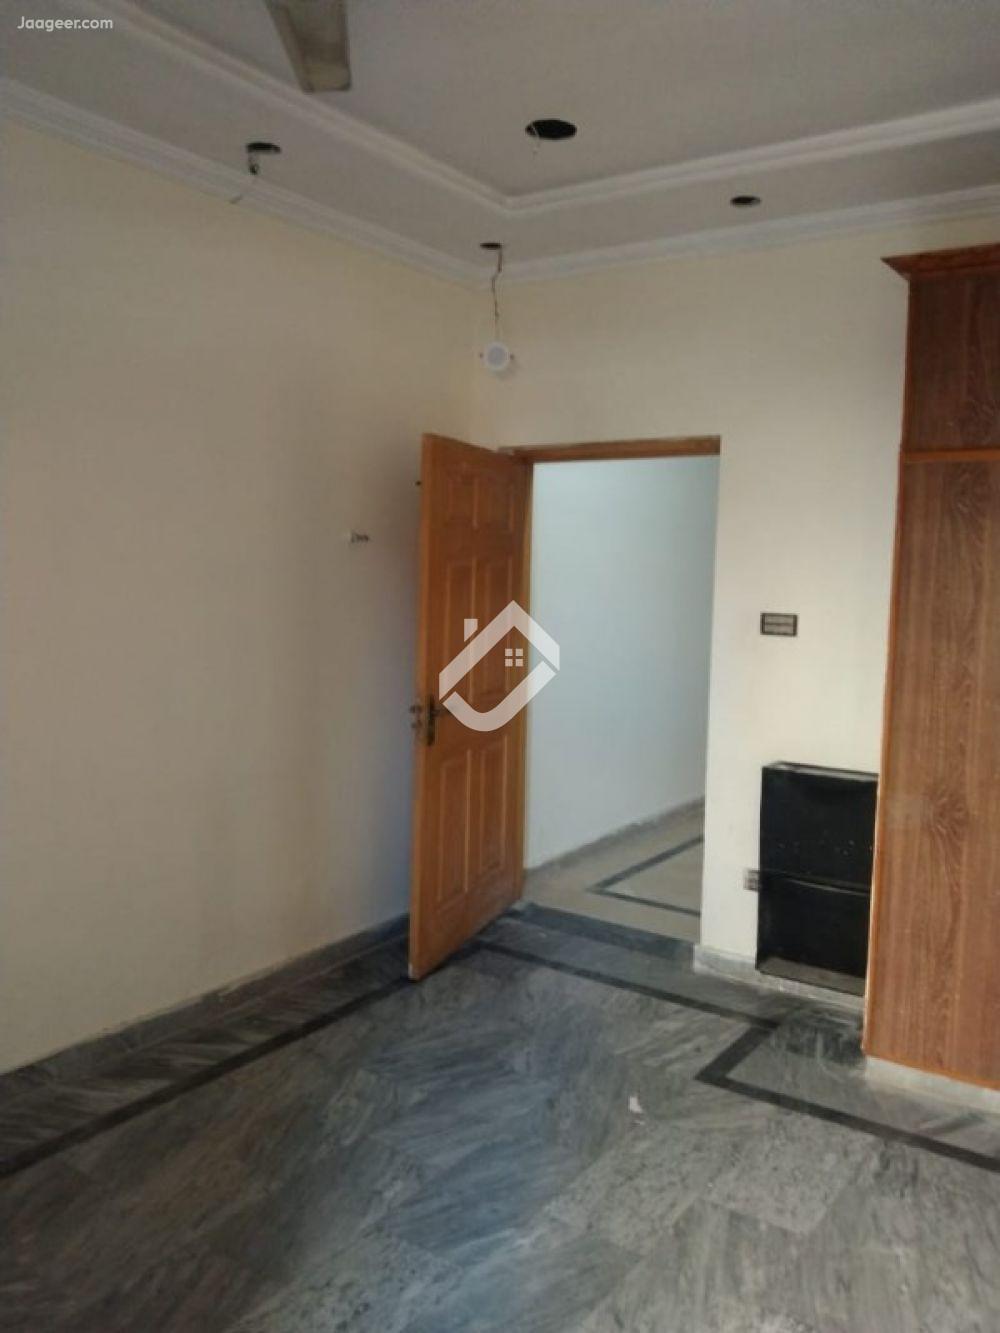 View  3.5 Marla Double Storey House For Sale In Old Satellite Town in Old Satellite Town, Sargodha